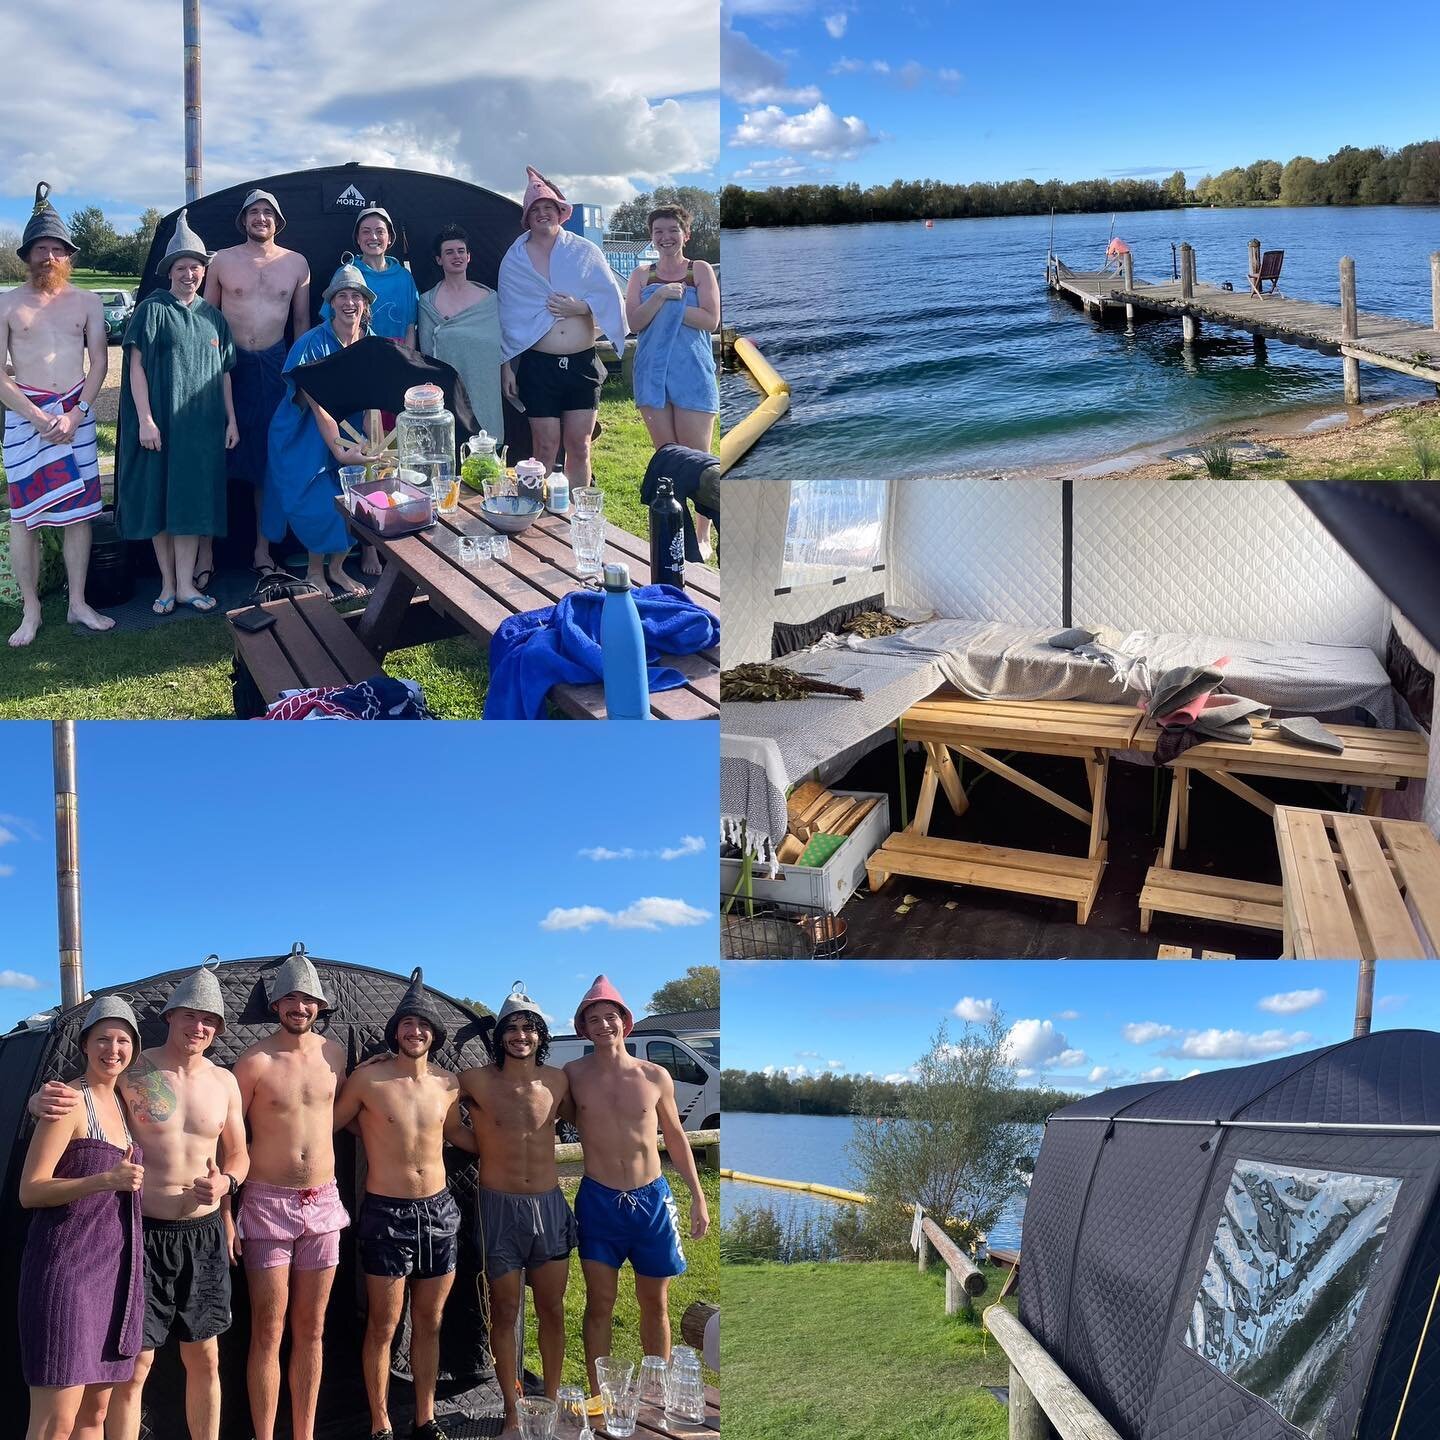 Wow, what a great day. Two fantastic sessions in beautiful weather.
Thanks so much to the wonderful guests today for helping kick of sauna season in such a great way. A few spaces remain for our next session so don&rsquo;t miss out and book ahead